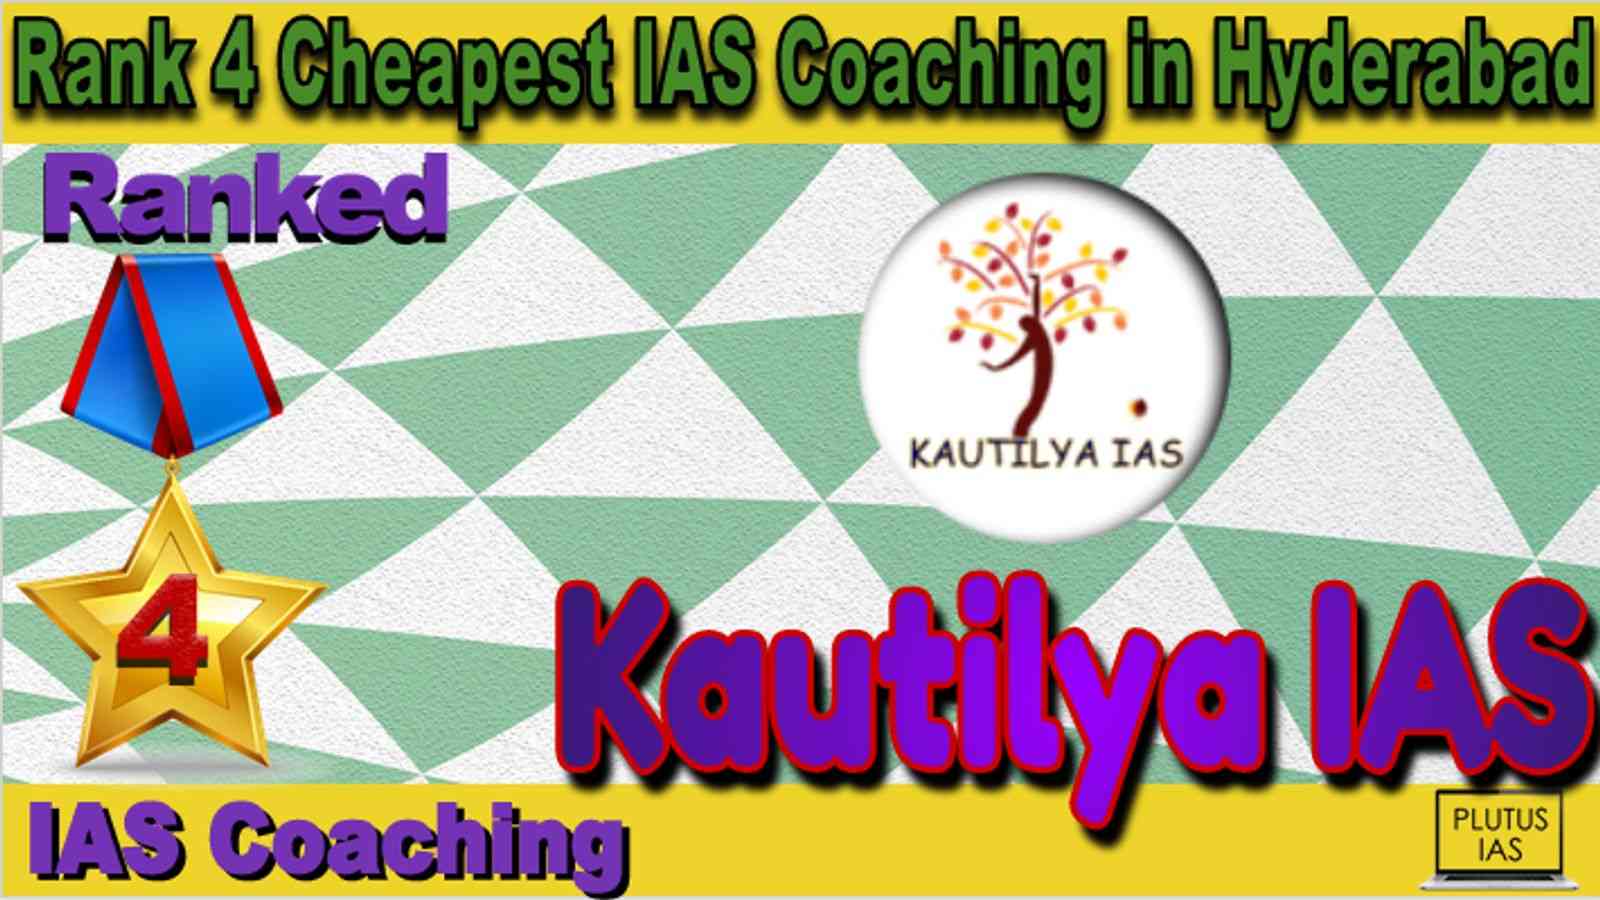 Rank 4 Cheapest IAS Coaching in Hyderabad